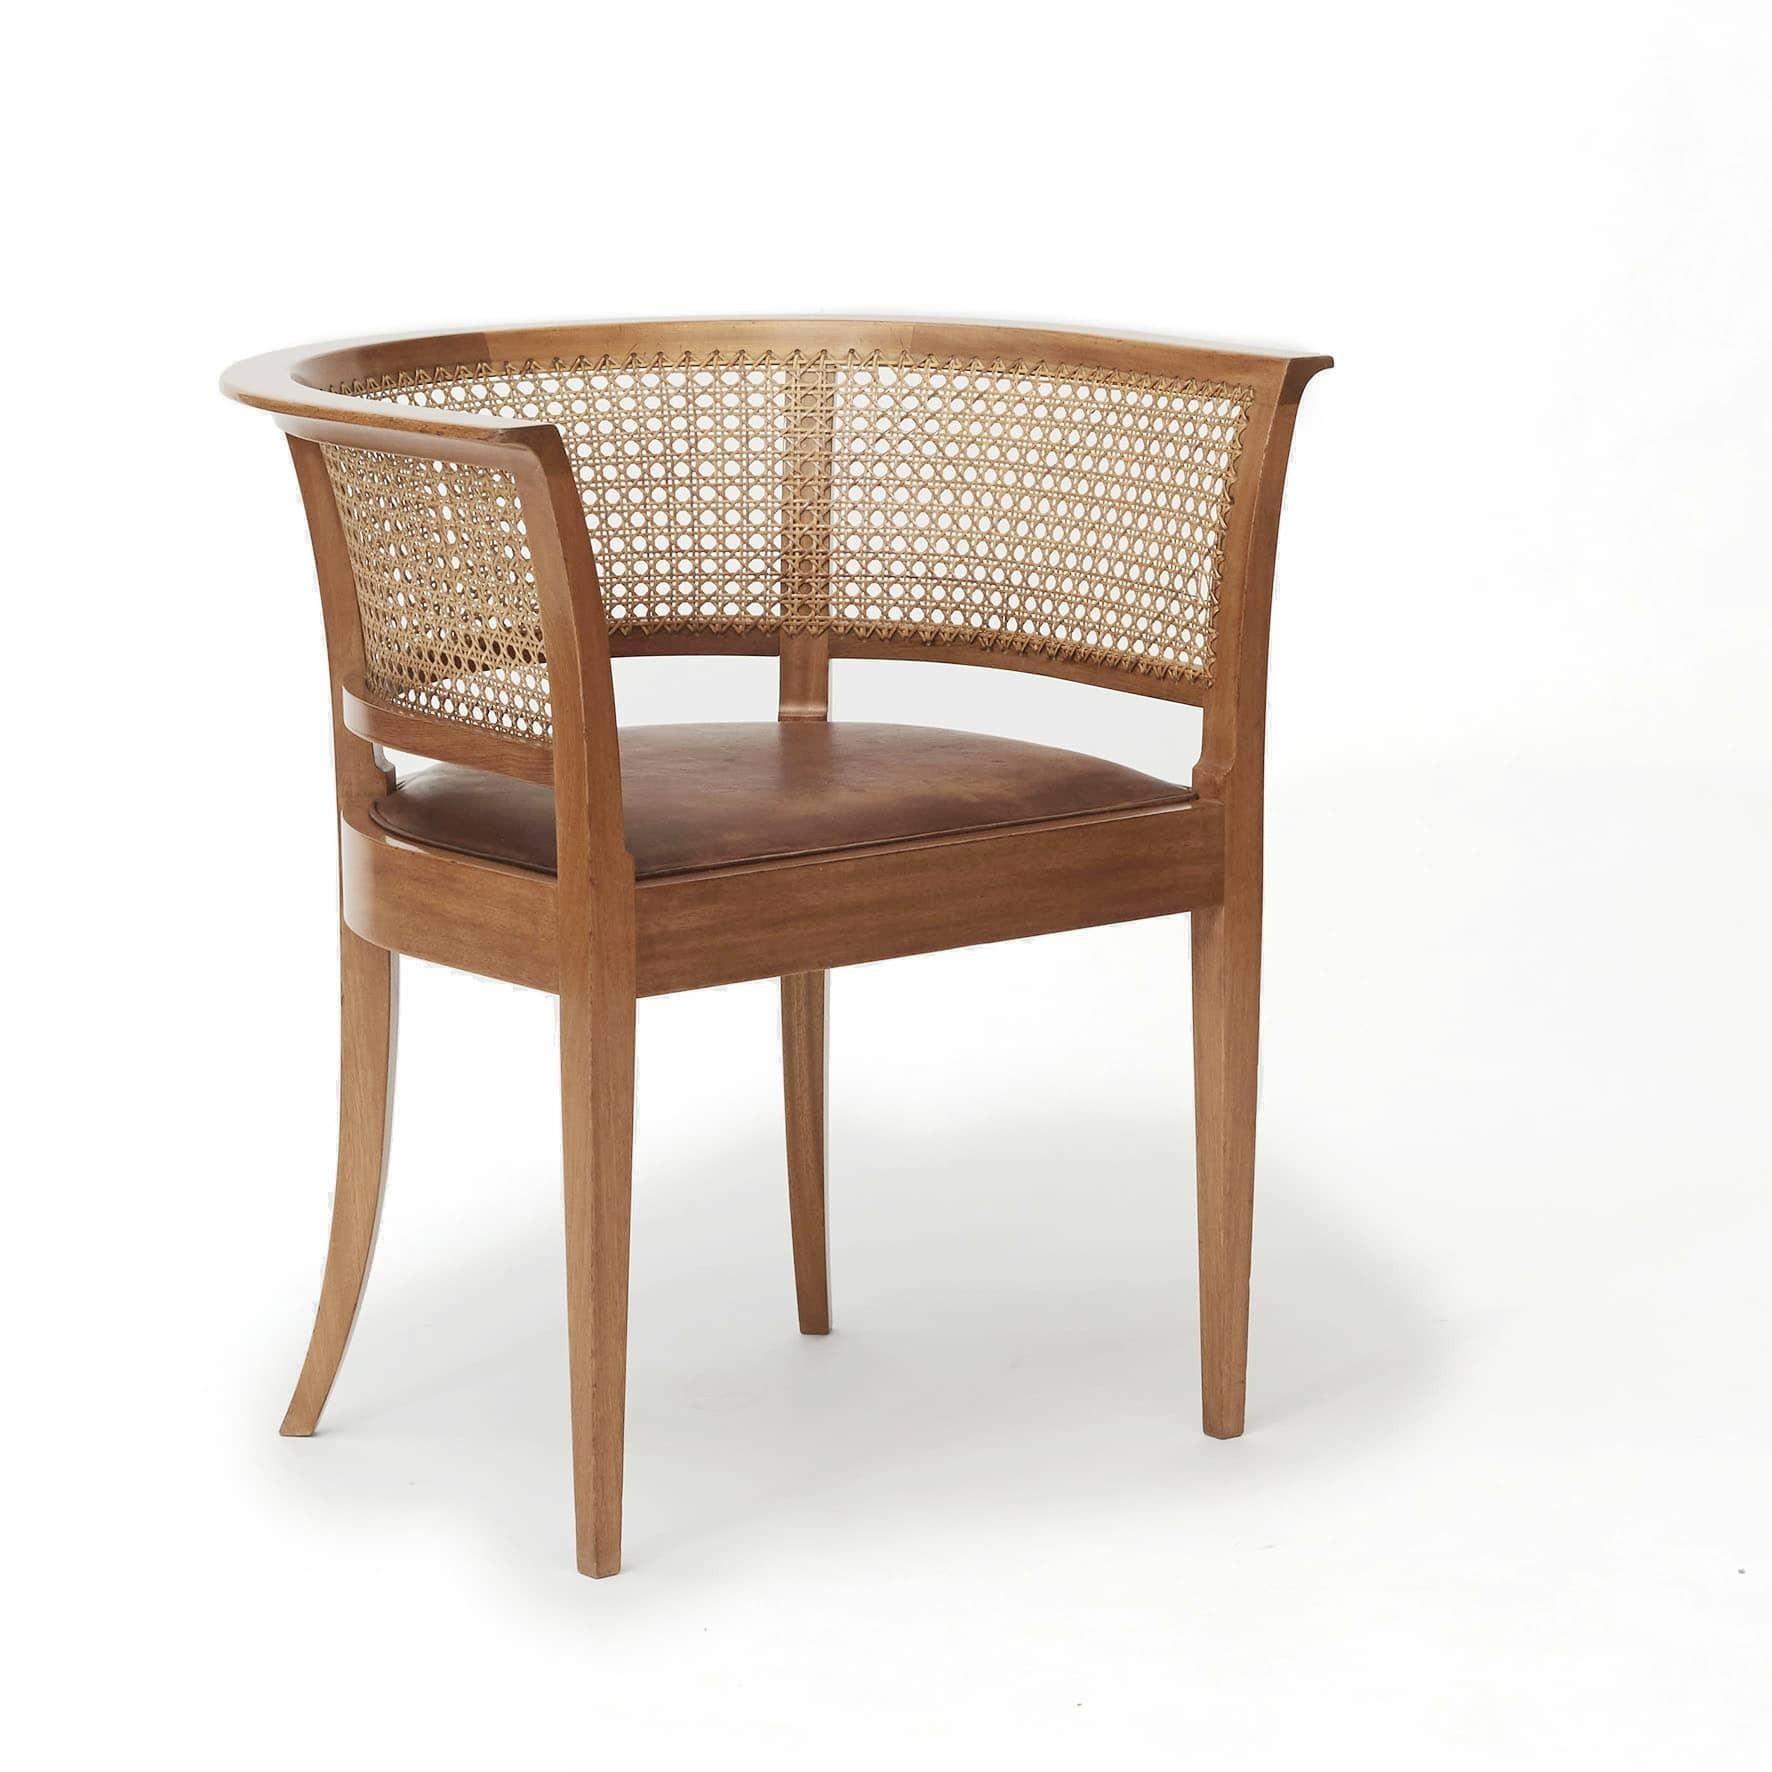 Kaare Klint 1888-1954.
Pair of 'Faaborg chairs' model 9662.
Made of mahogany, back mounted with French wicker, seat upholstered in leather with good age-related patina.

Produced by Snedkermester Rud. Rasmussen with sticker from here. Designed